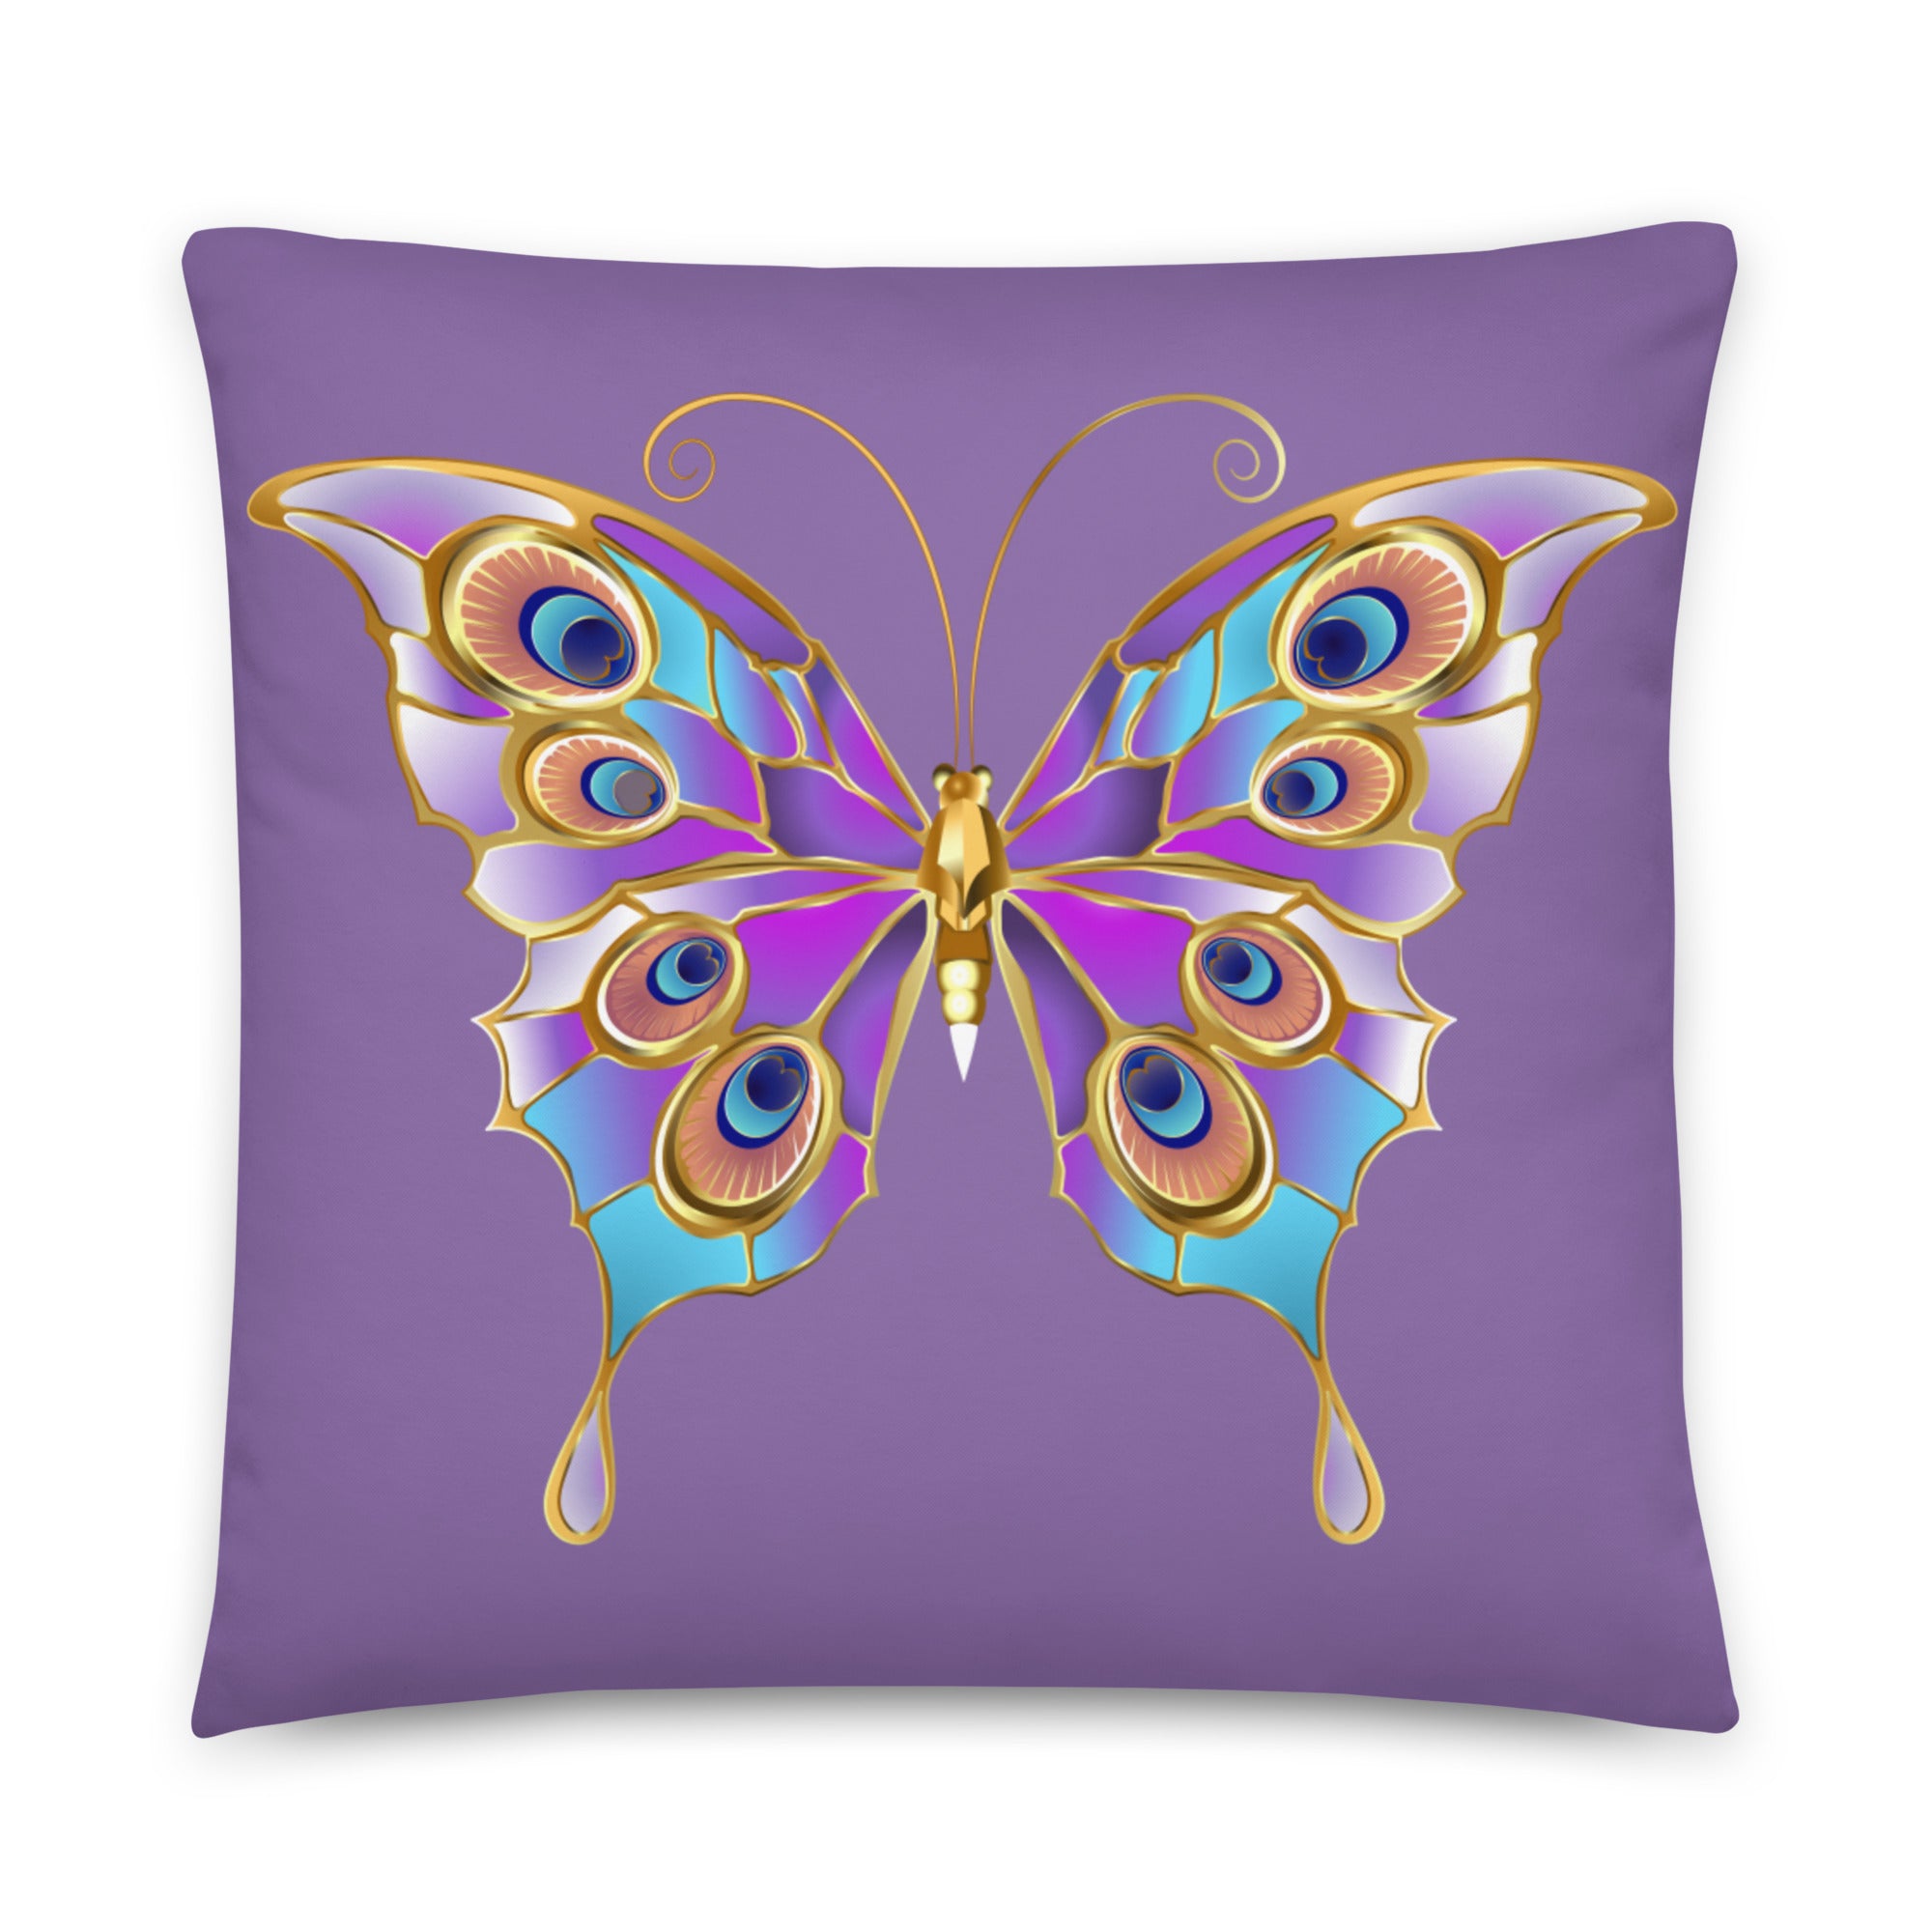 Gold Butterfly Peacock Cushion Cover, a true statement piece for adding a touch of opulence and elegance to your living space. 